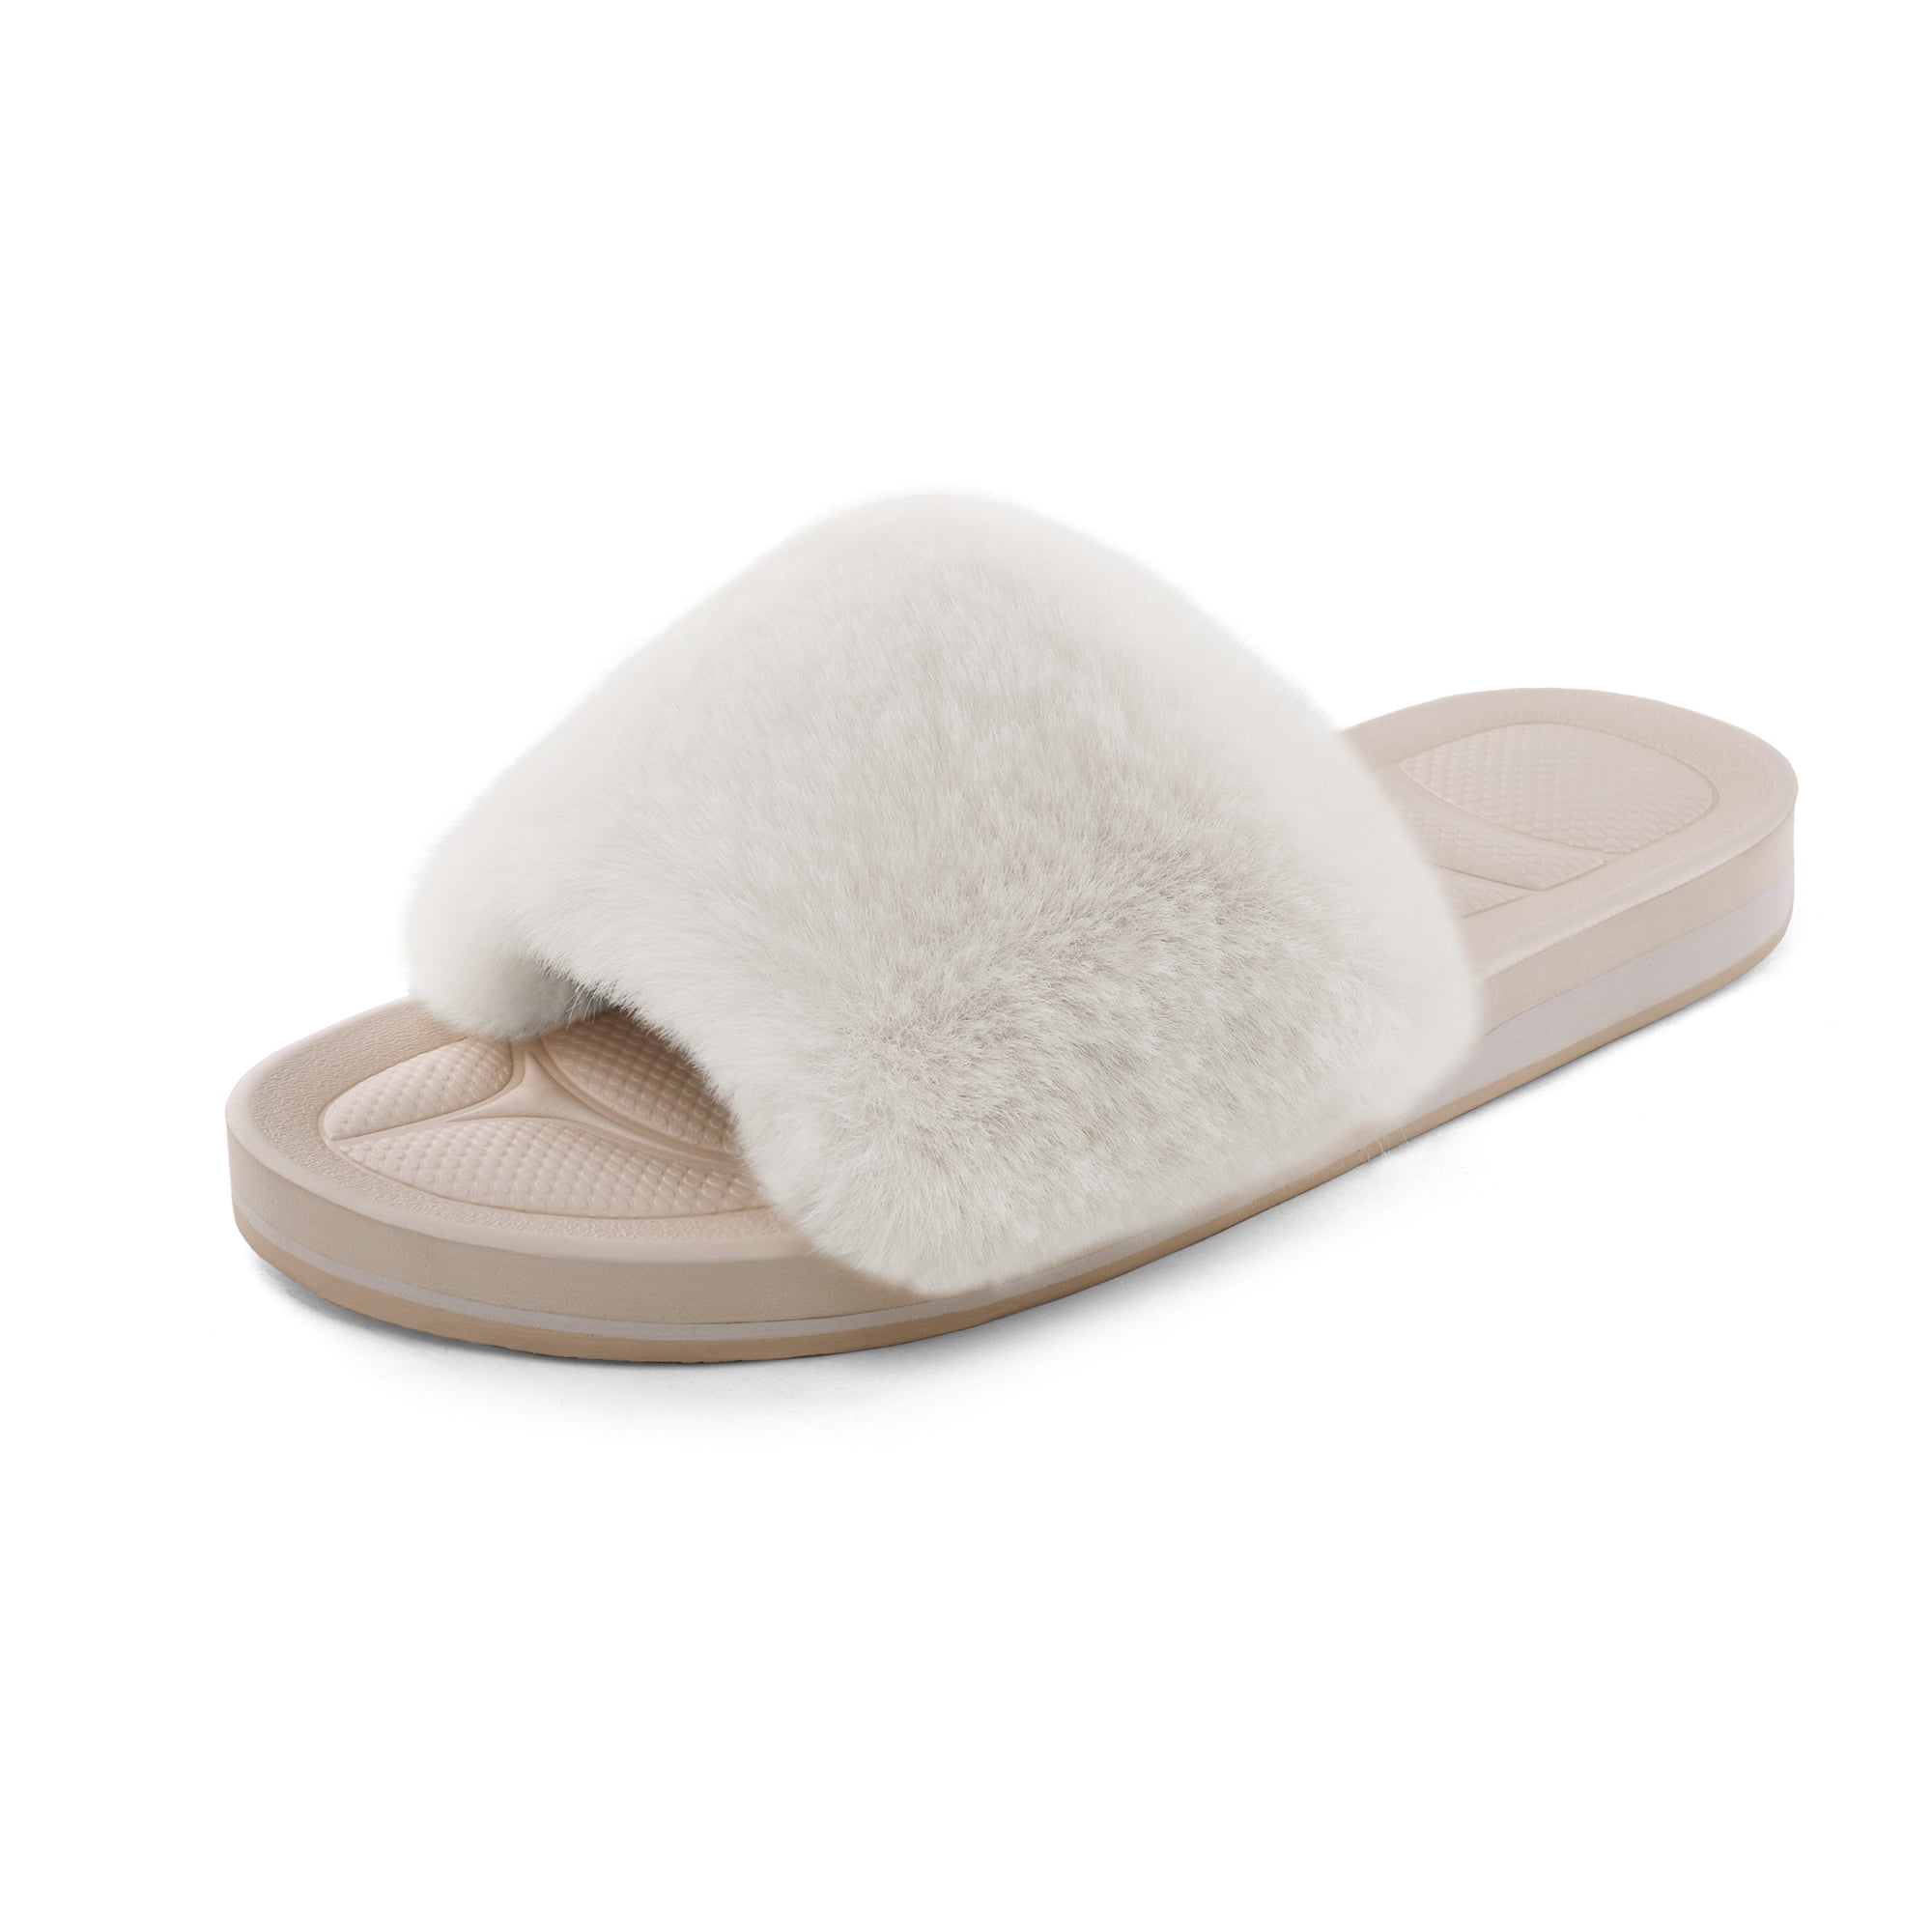 Womens Furry Slide Slippers Suede Fuzz Cozy House Shoes Scuff Mule Sandal 